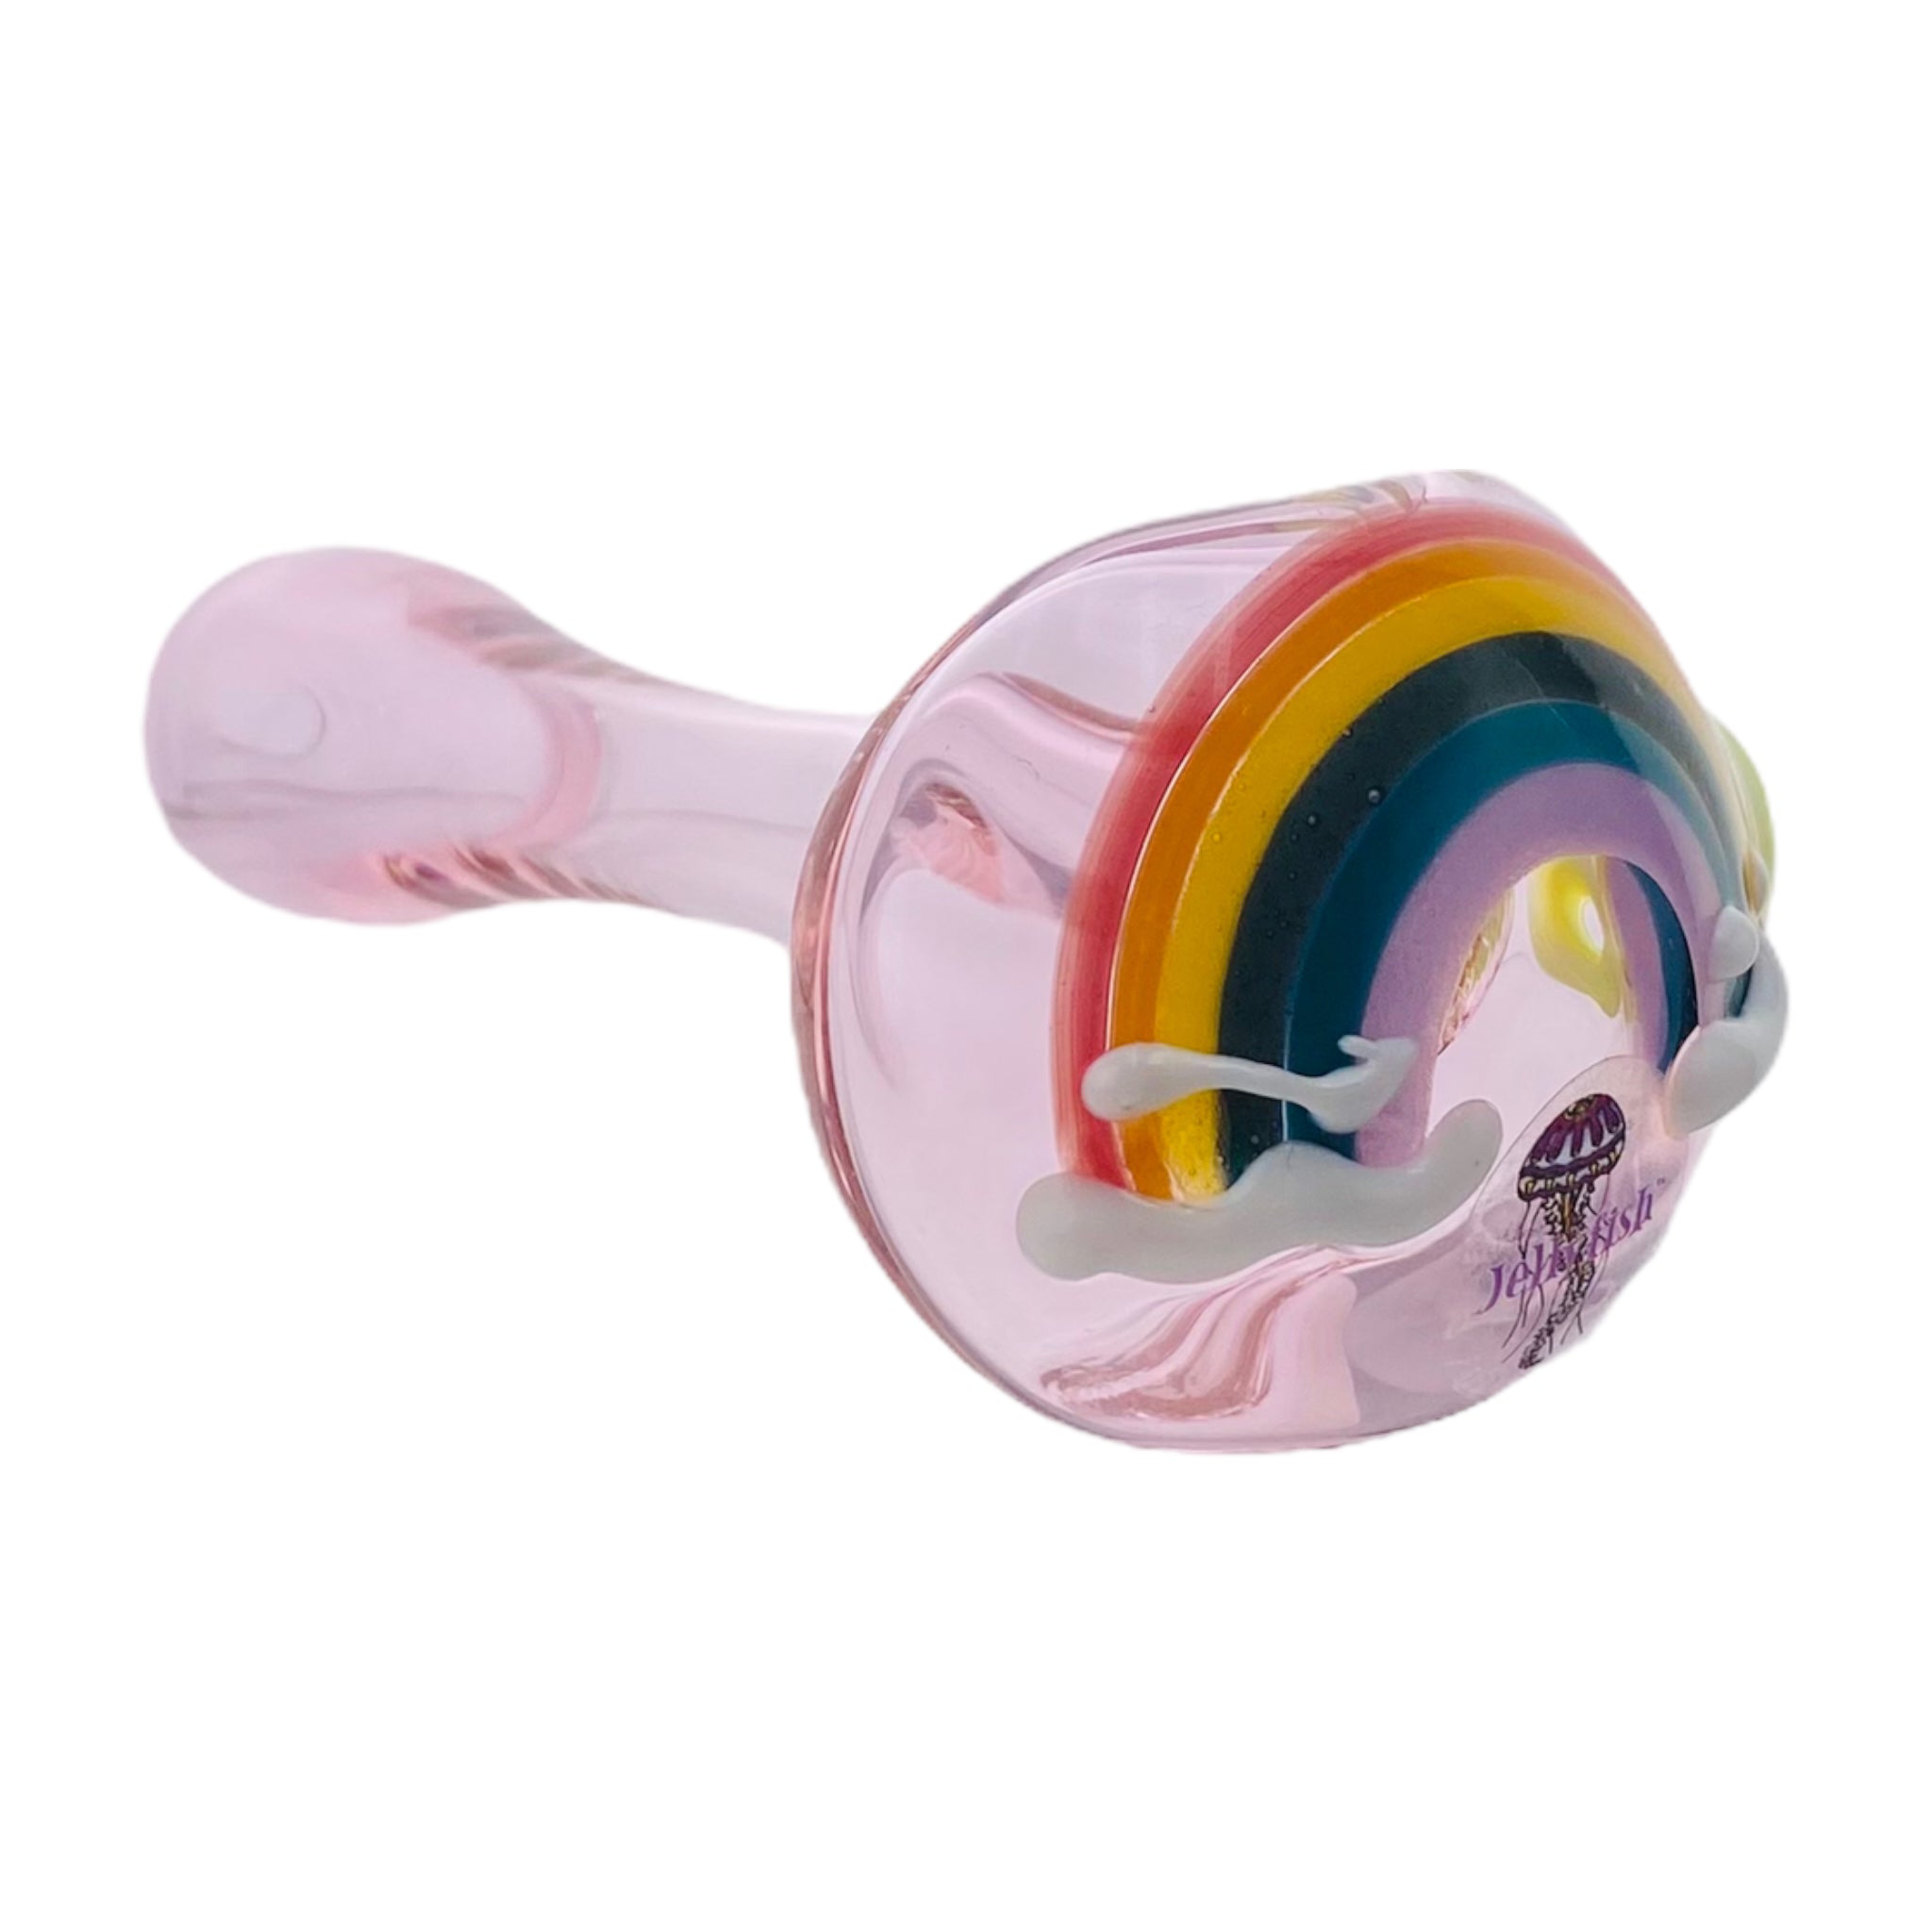 Jellyfish Glass - Pink Glass Hand Pipe With Rainbow And Clouds